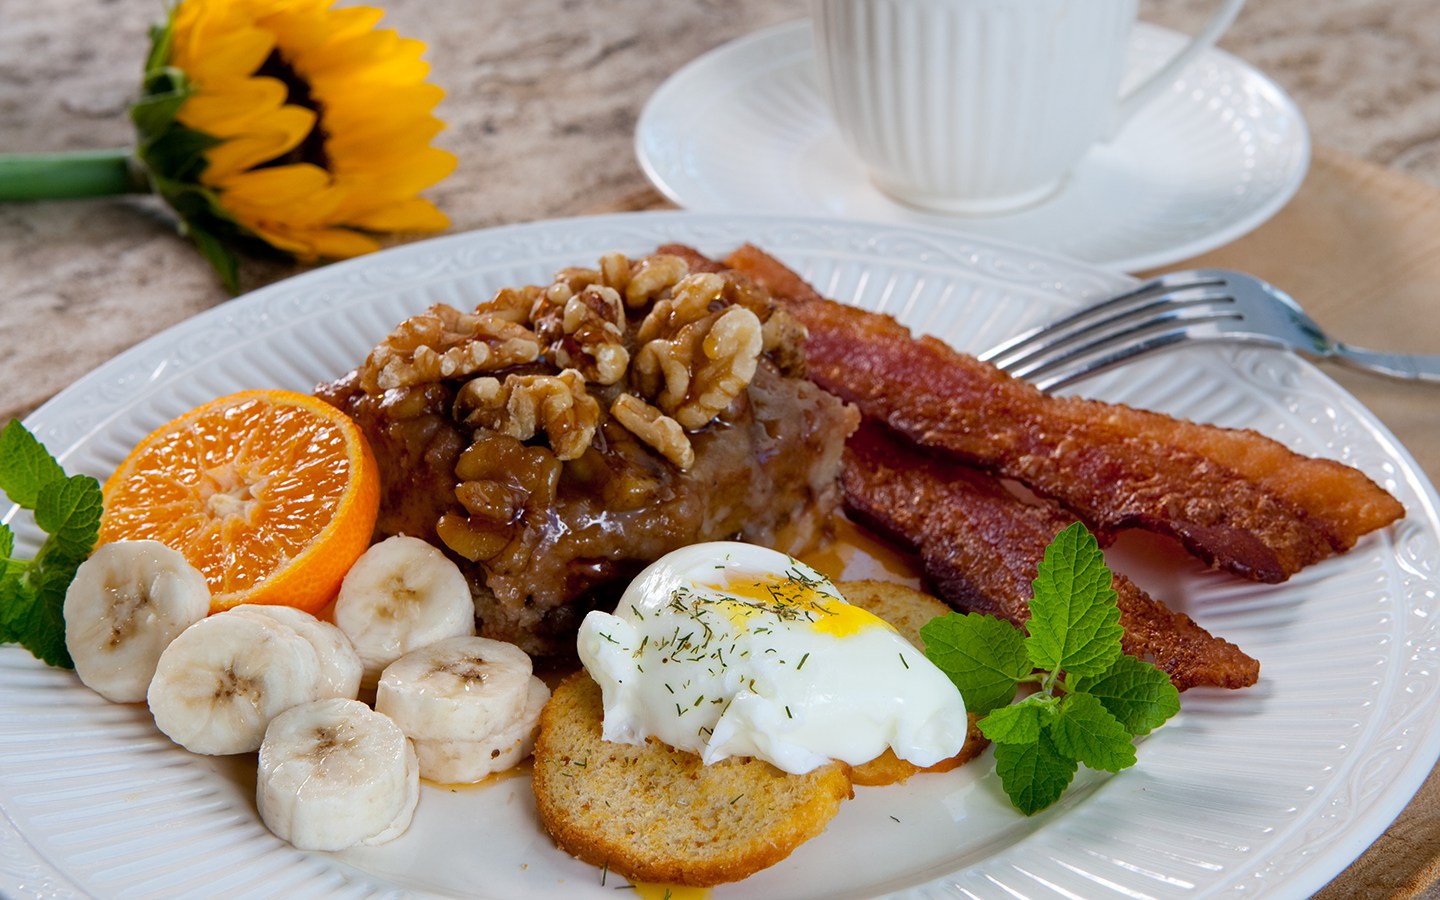 White plate with bacon, poached egg on toast, sliced banana, orange half with pastry covered with walnuts and coffee mug.